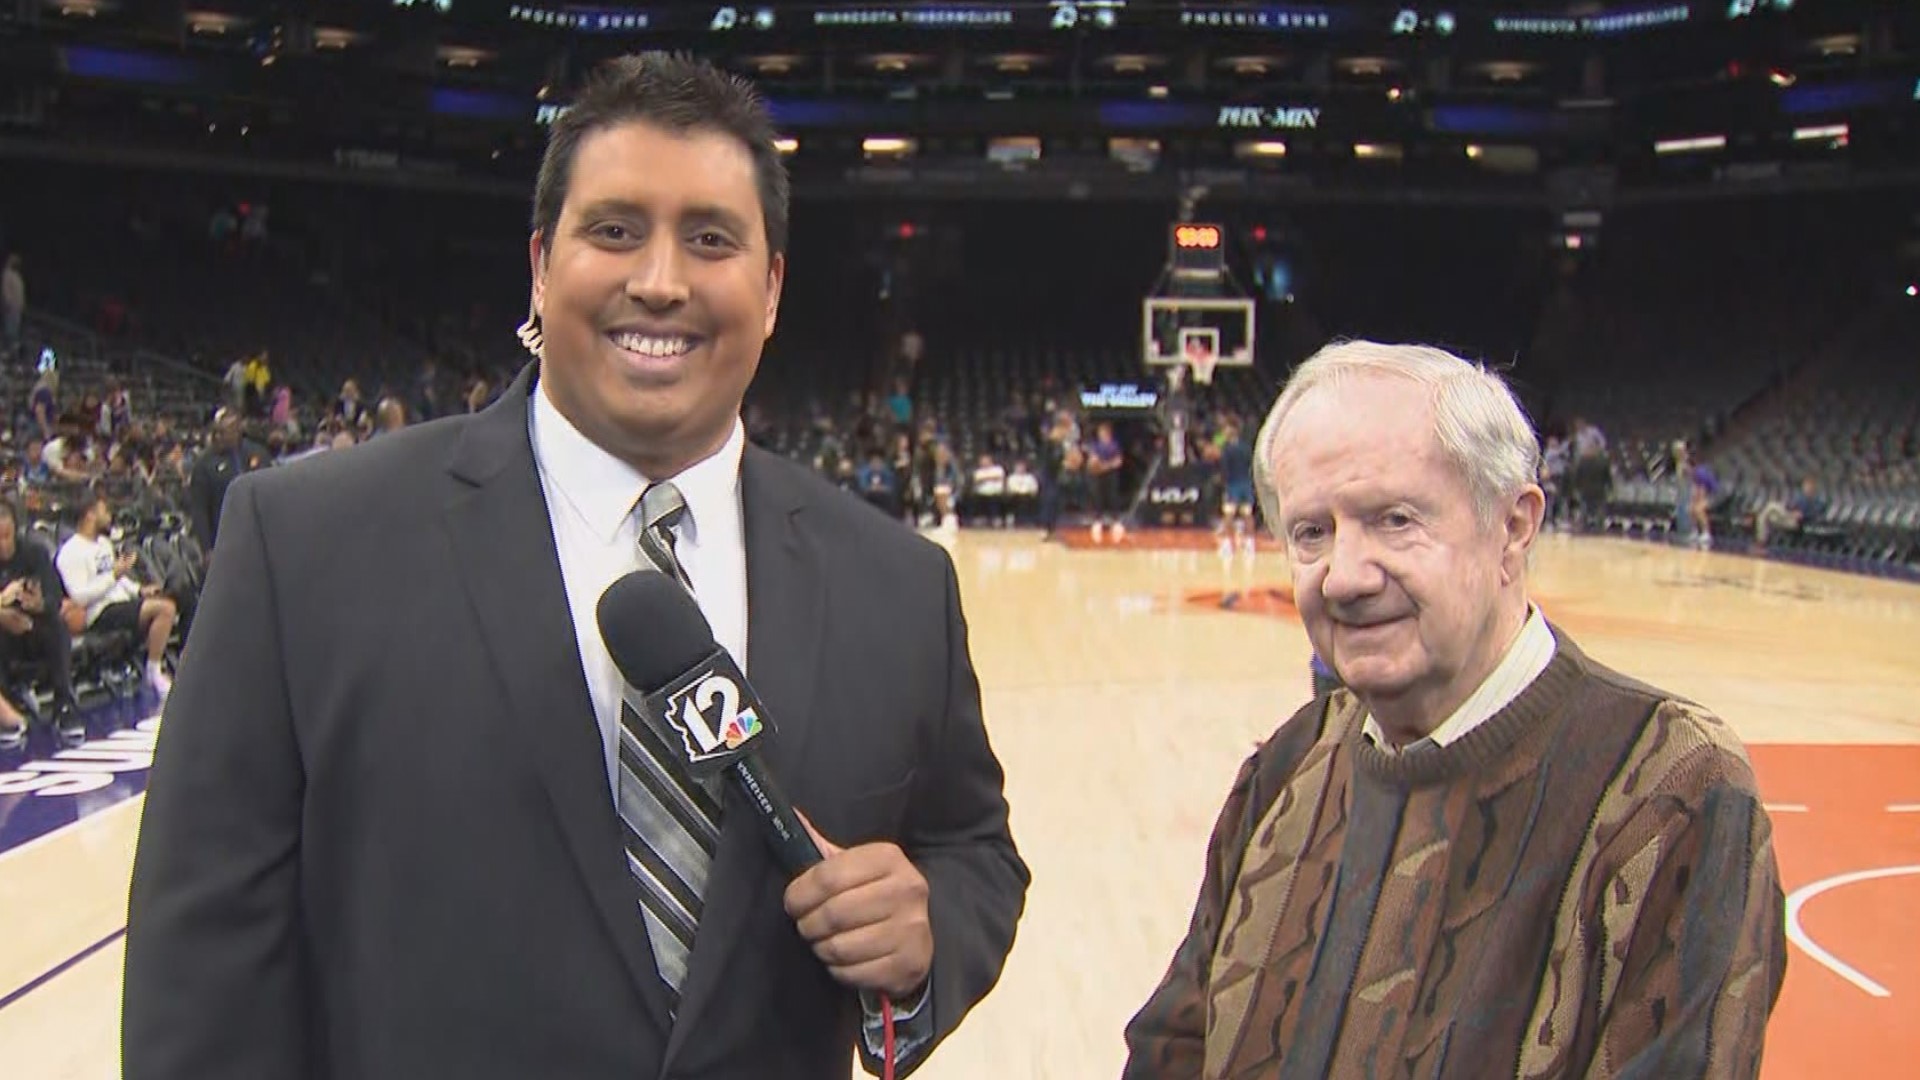 12Sports spoke exclusively with veteran Suns announcer, Al McCoy who recently announced his retirement after more than 50 years with the NBA team.